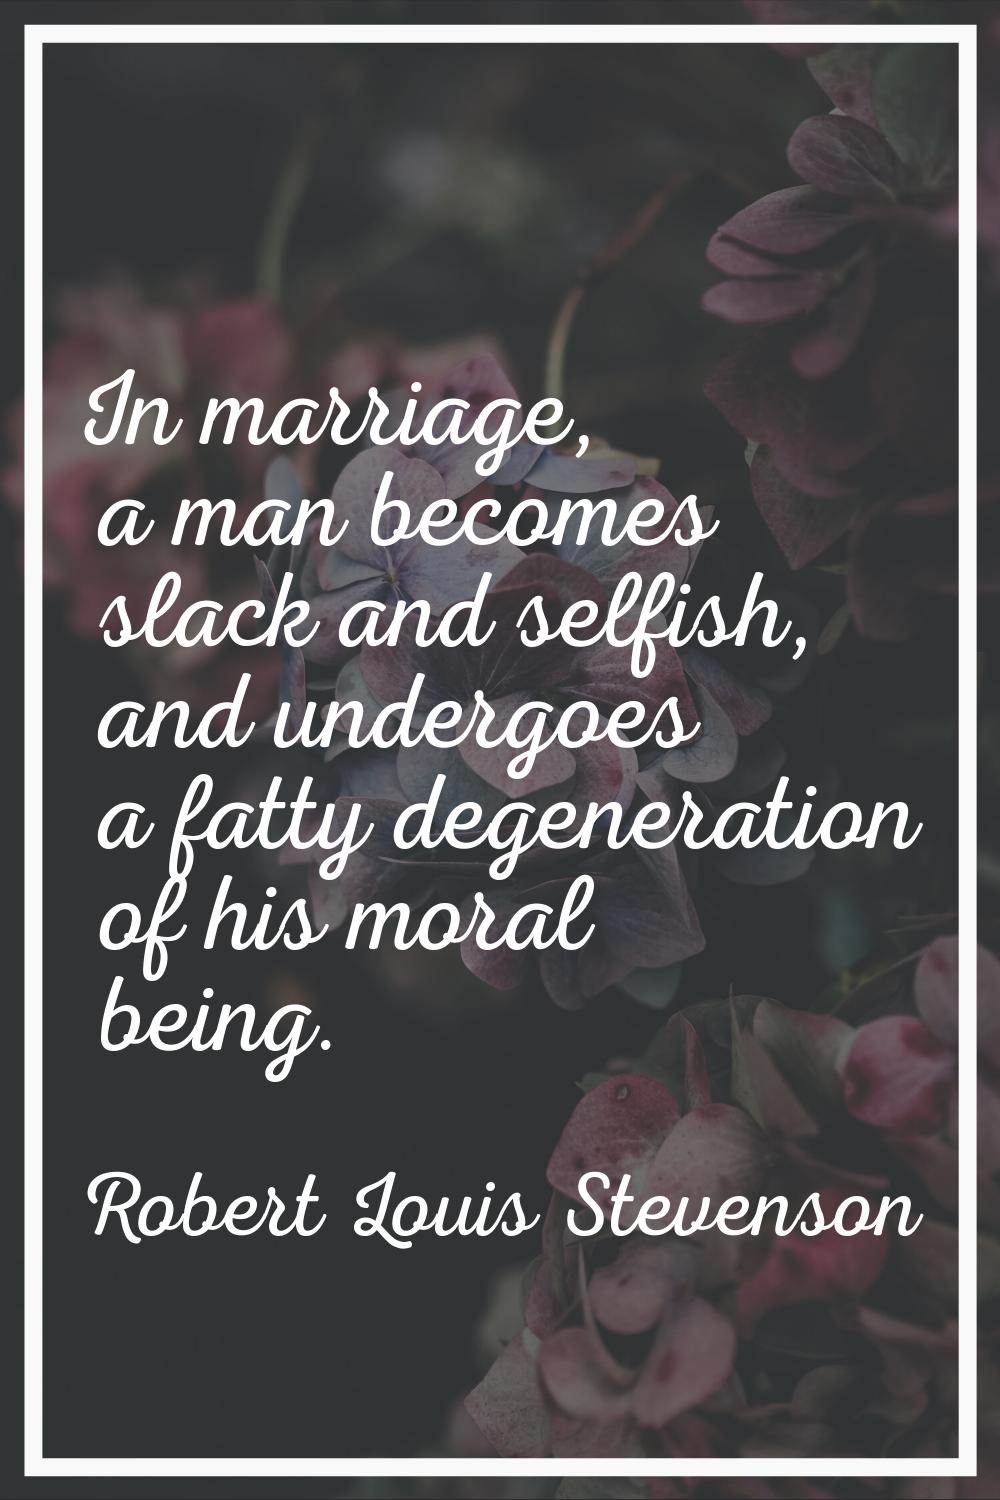 In marriage, a man becomes slack and selfish, and undergoes a fatty degeneration of his moral being